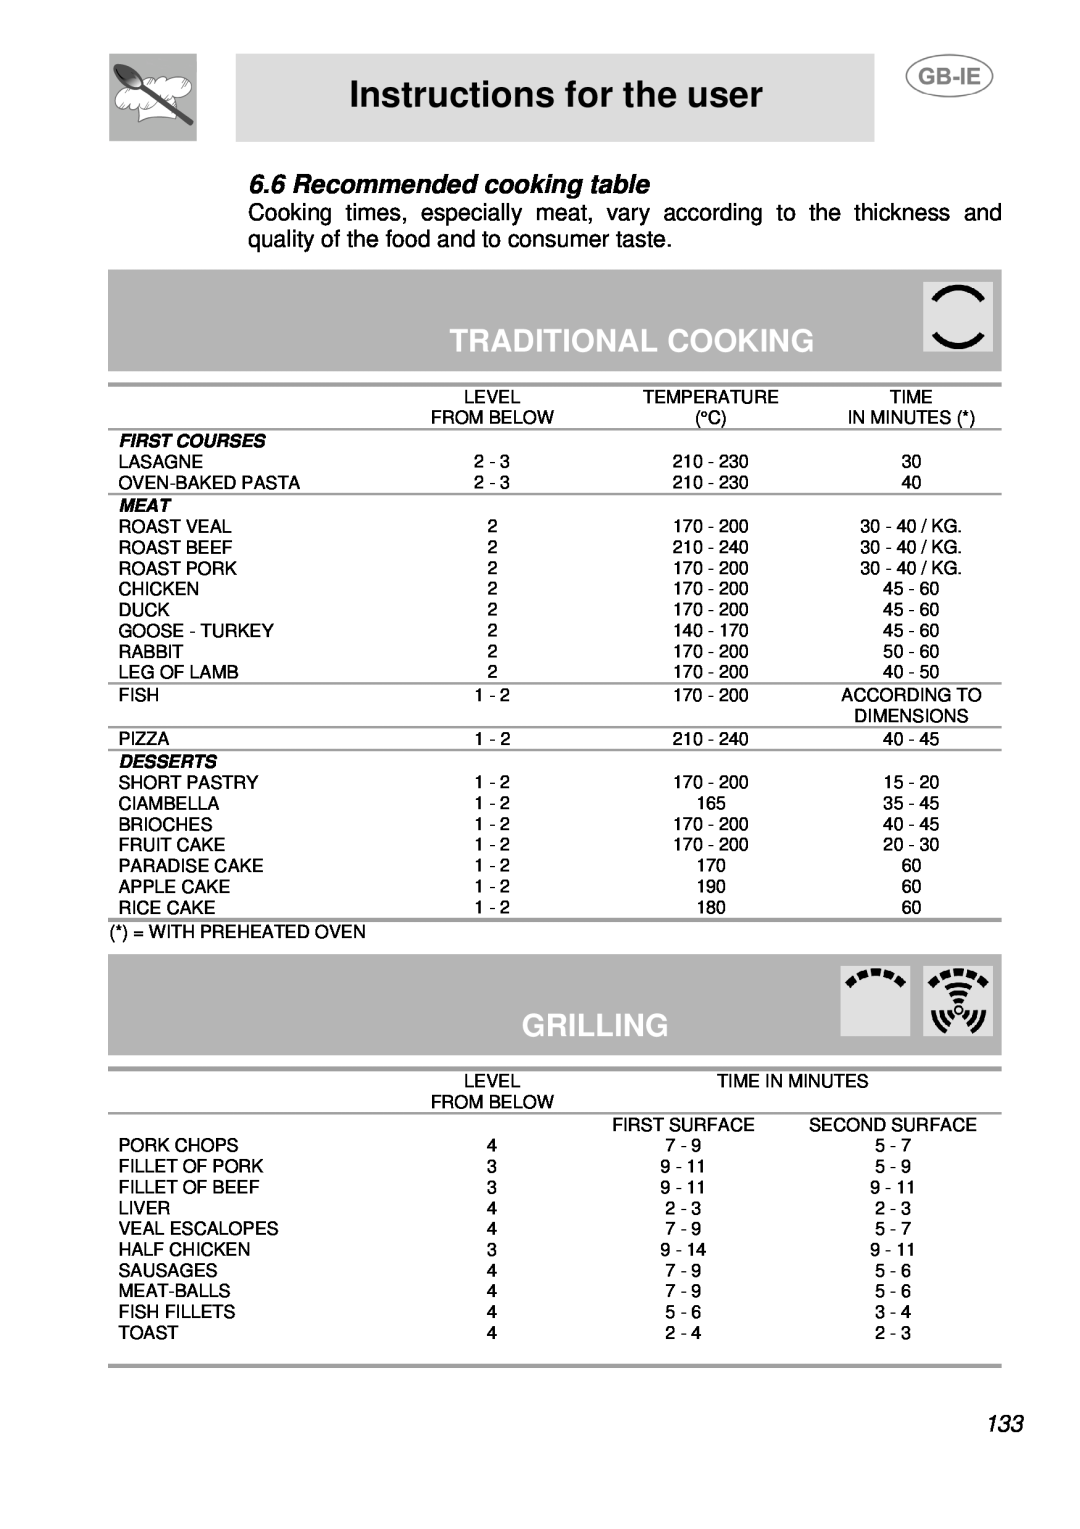 Smeg SDK380X-5 Traditional Cooking, Grilling, Recommended cooking table, Instructions for the user, First Courses, Meat 